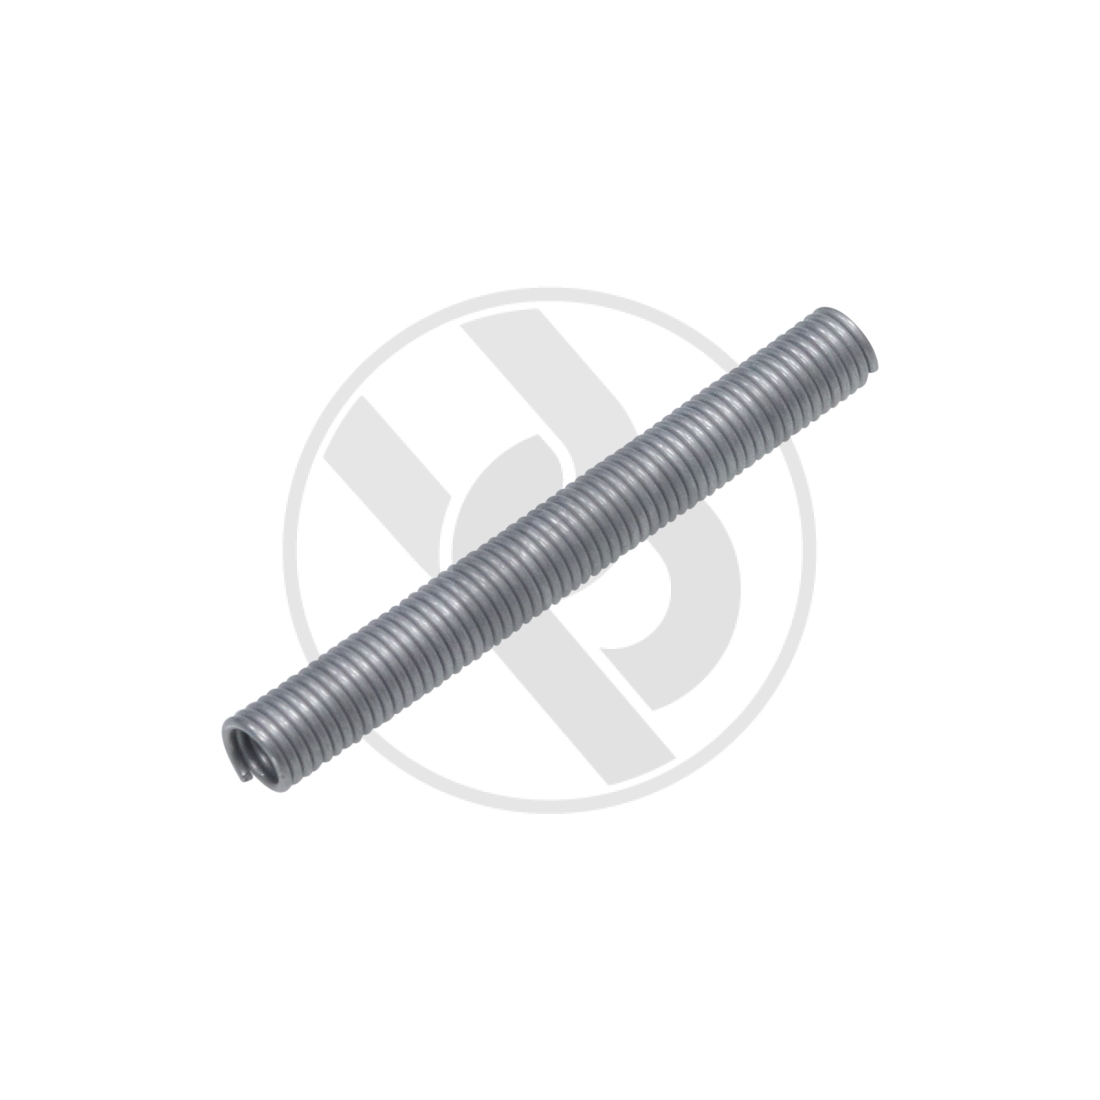 Tension spring 48.5mm for Inno-Tech